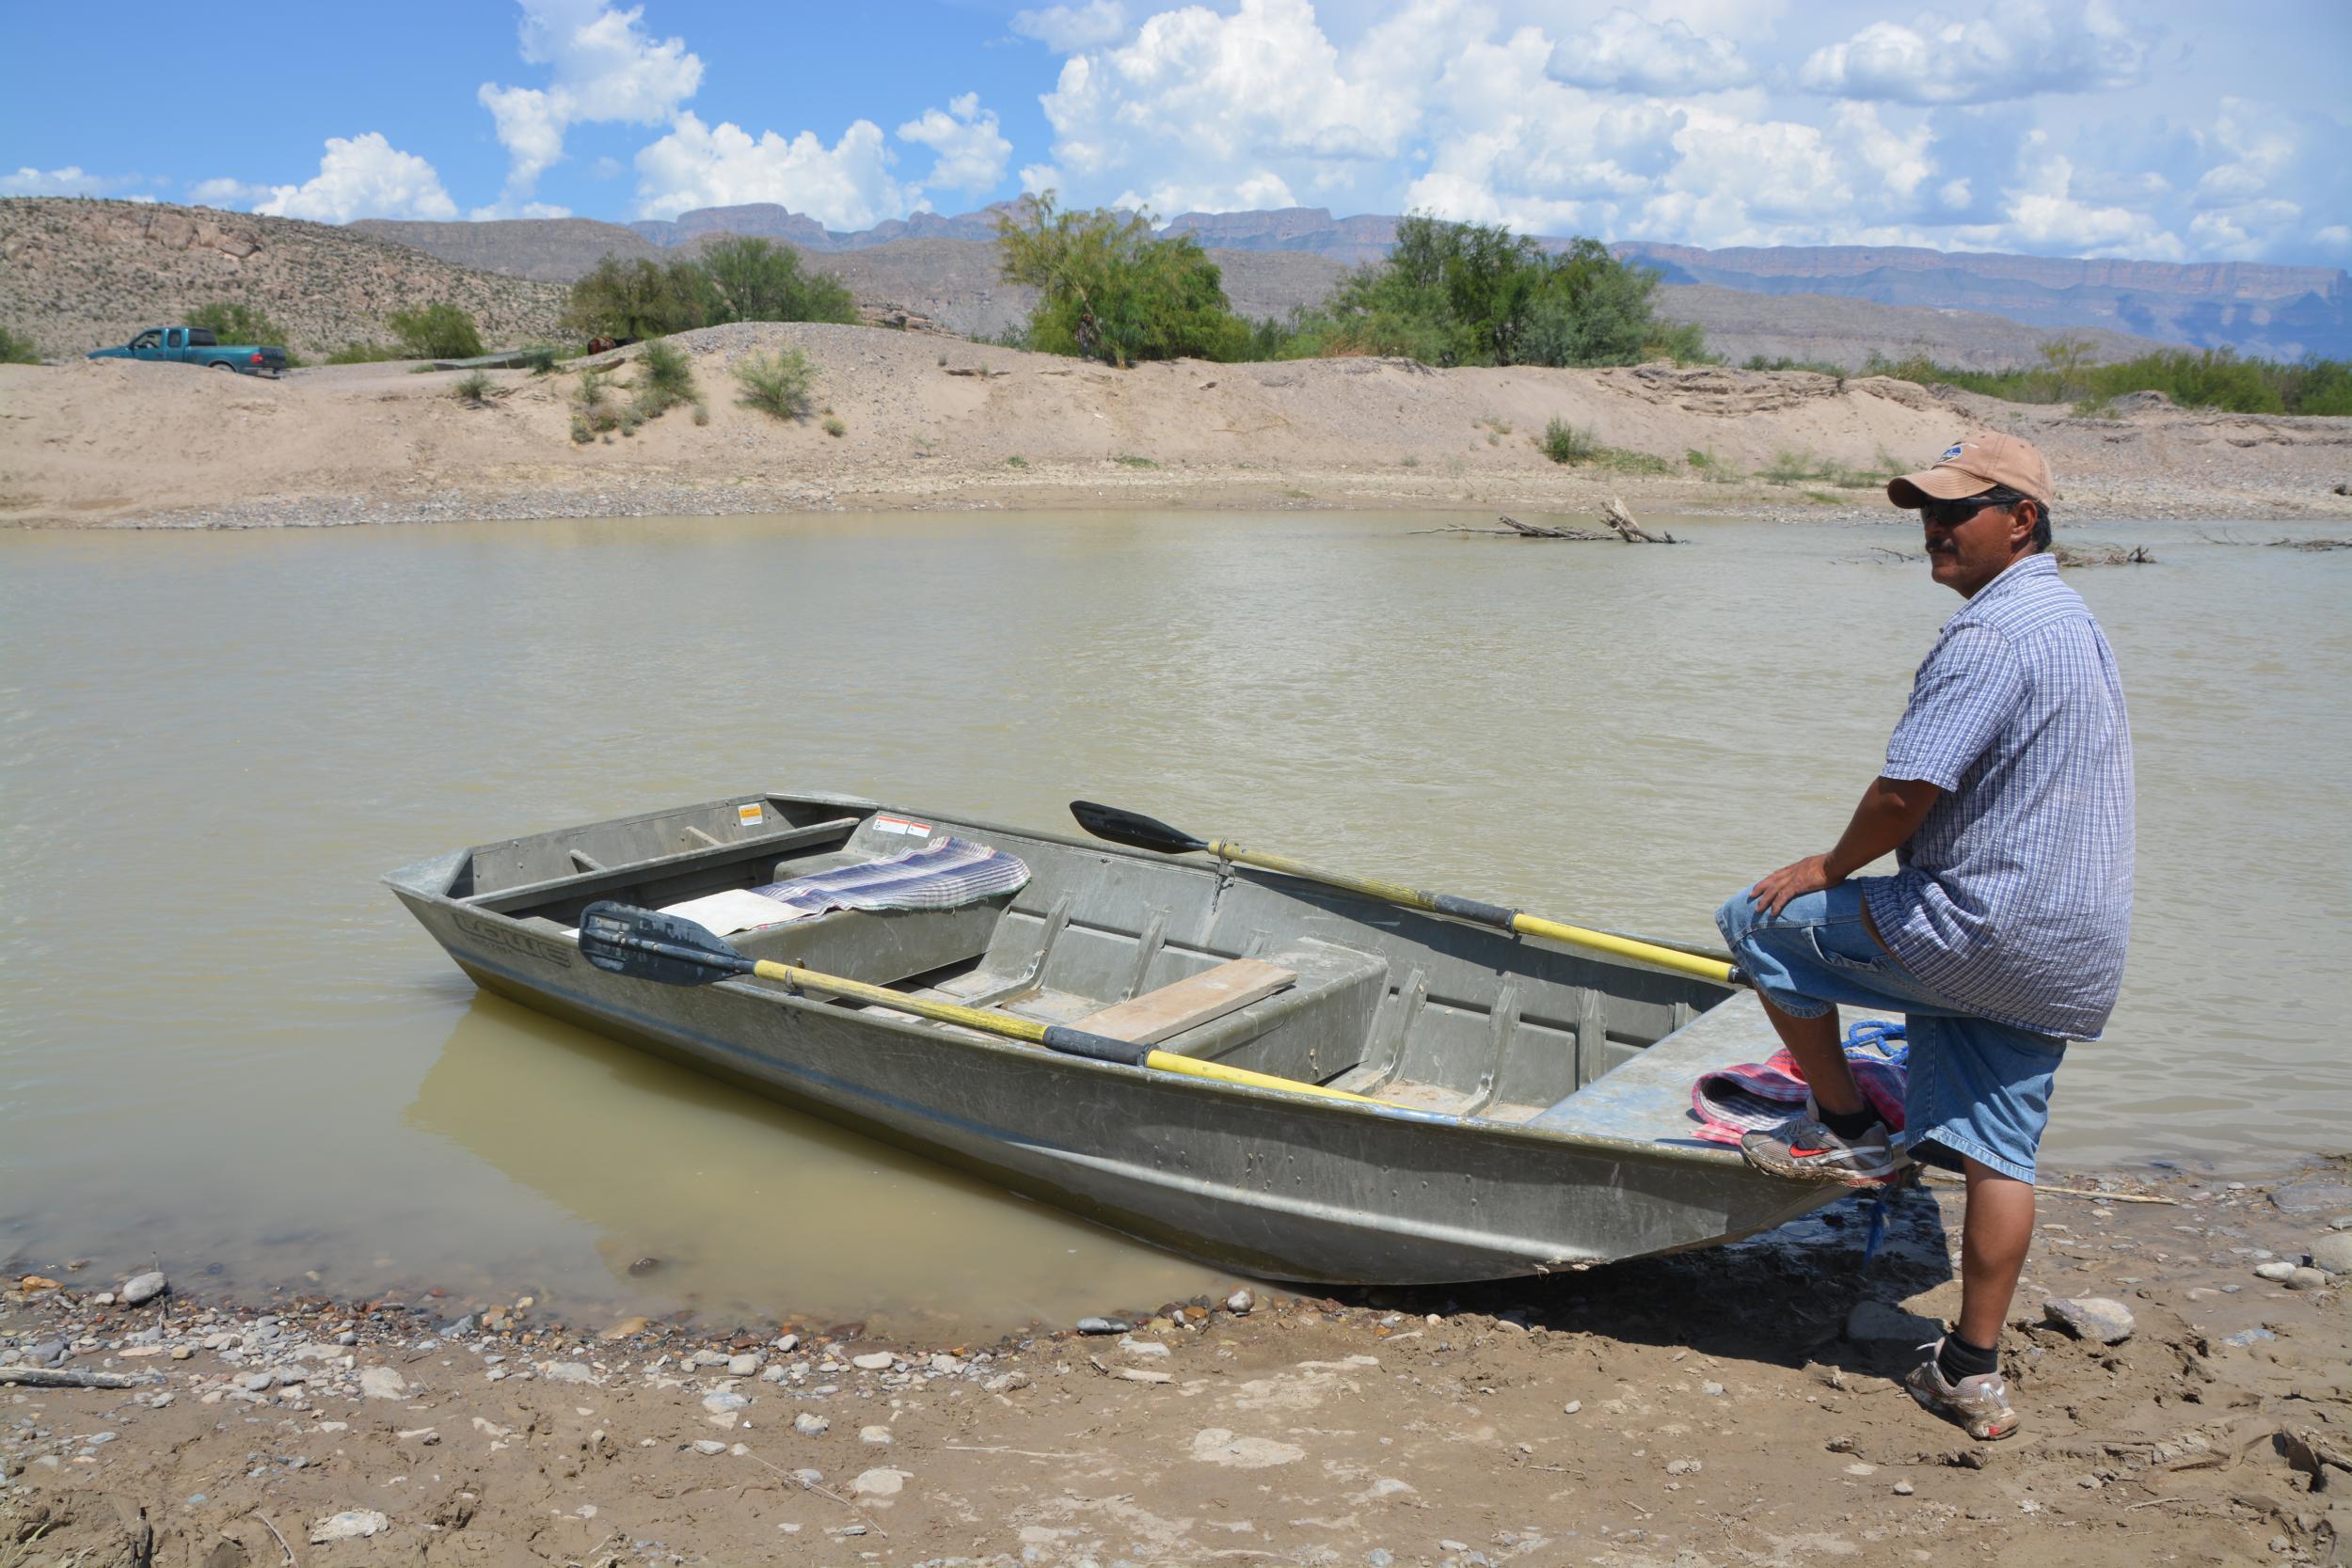 Us Mexico Border Rio Grande Crossing Is Getting Smaller Everyday - this boat is the legal way to cross the border near boquillas but wading through